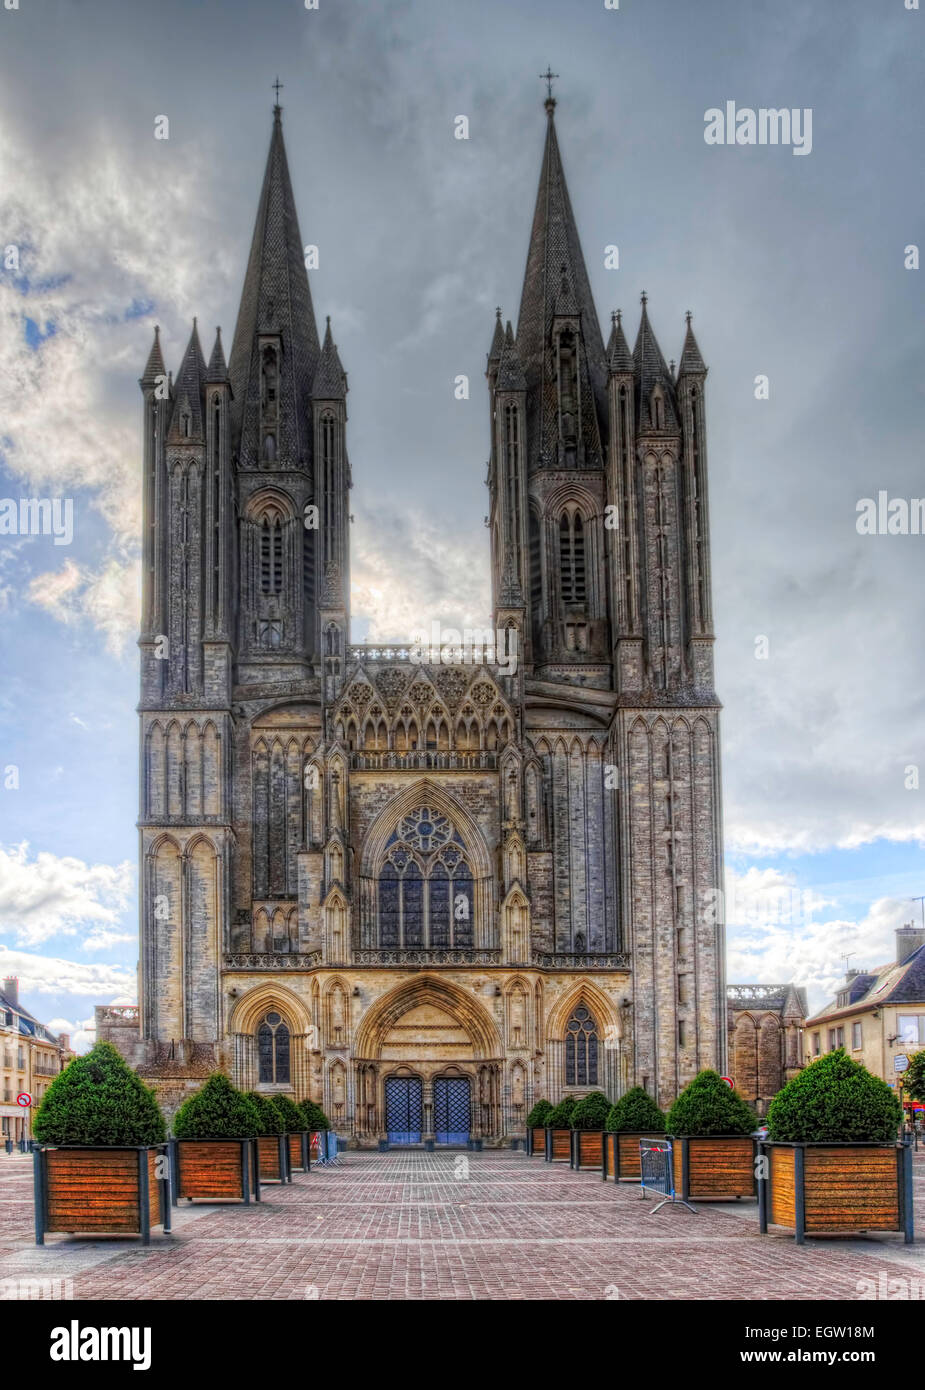 The wonderful cathedral at Coutance in France Stock Photo